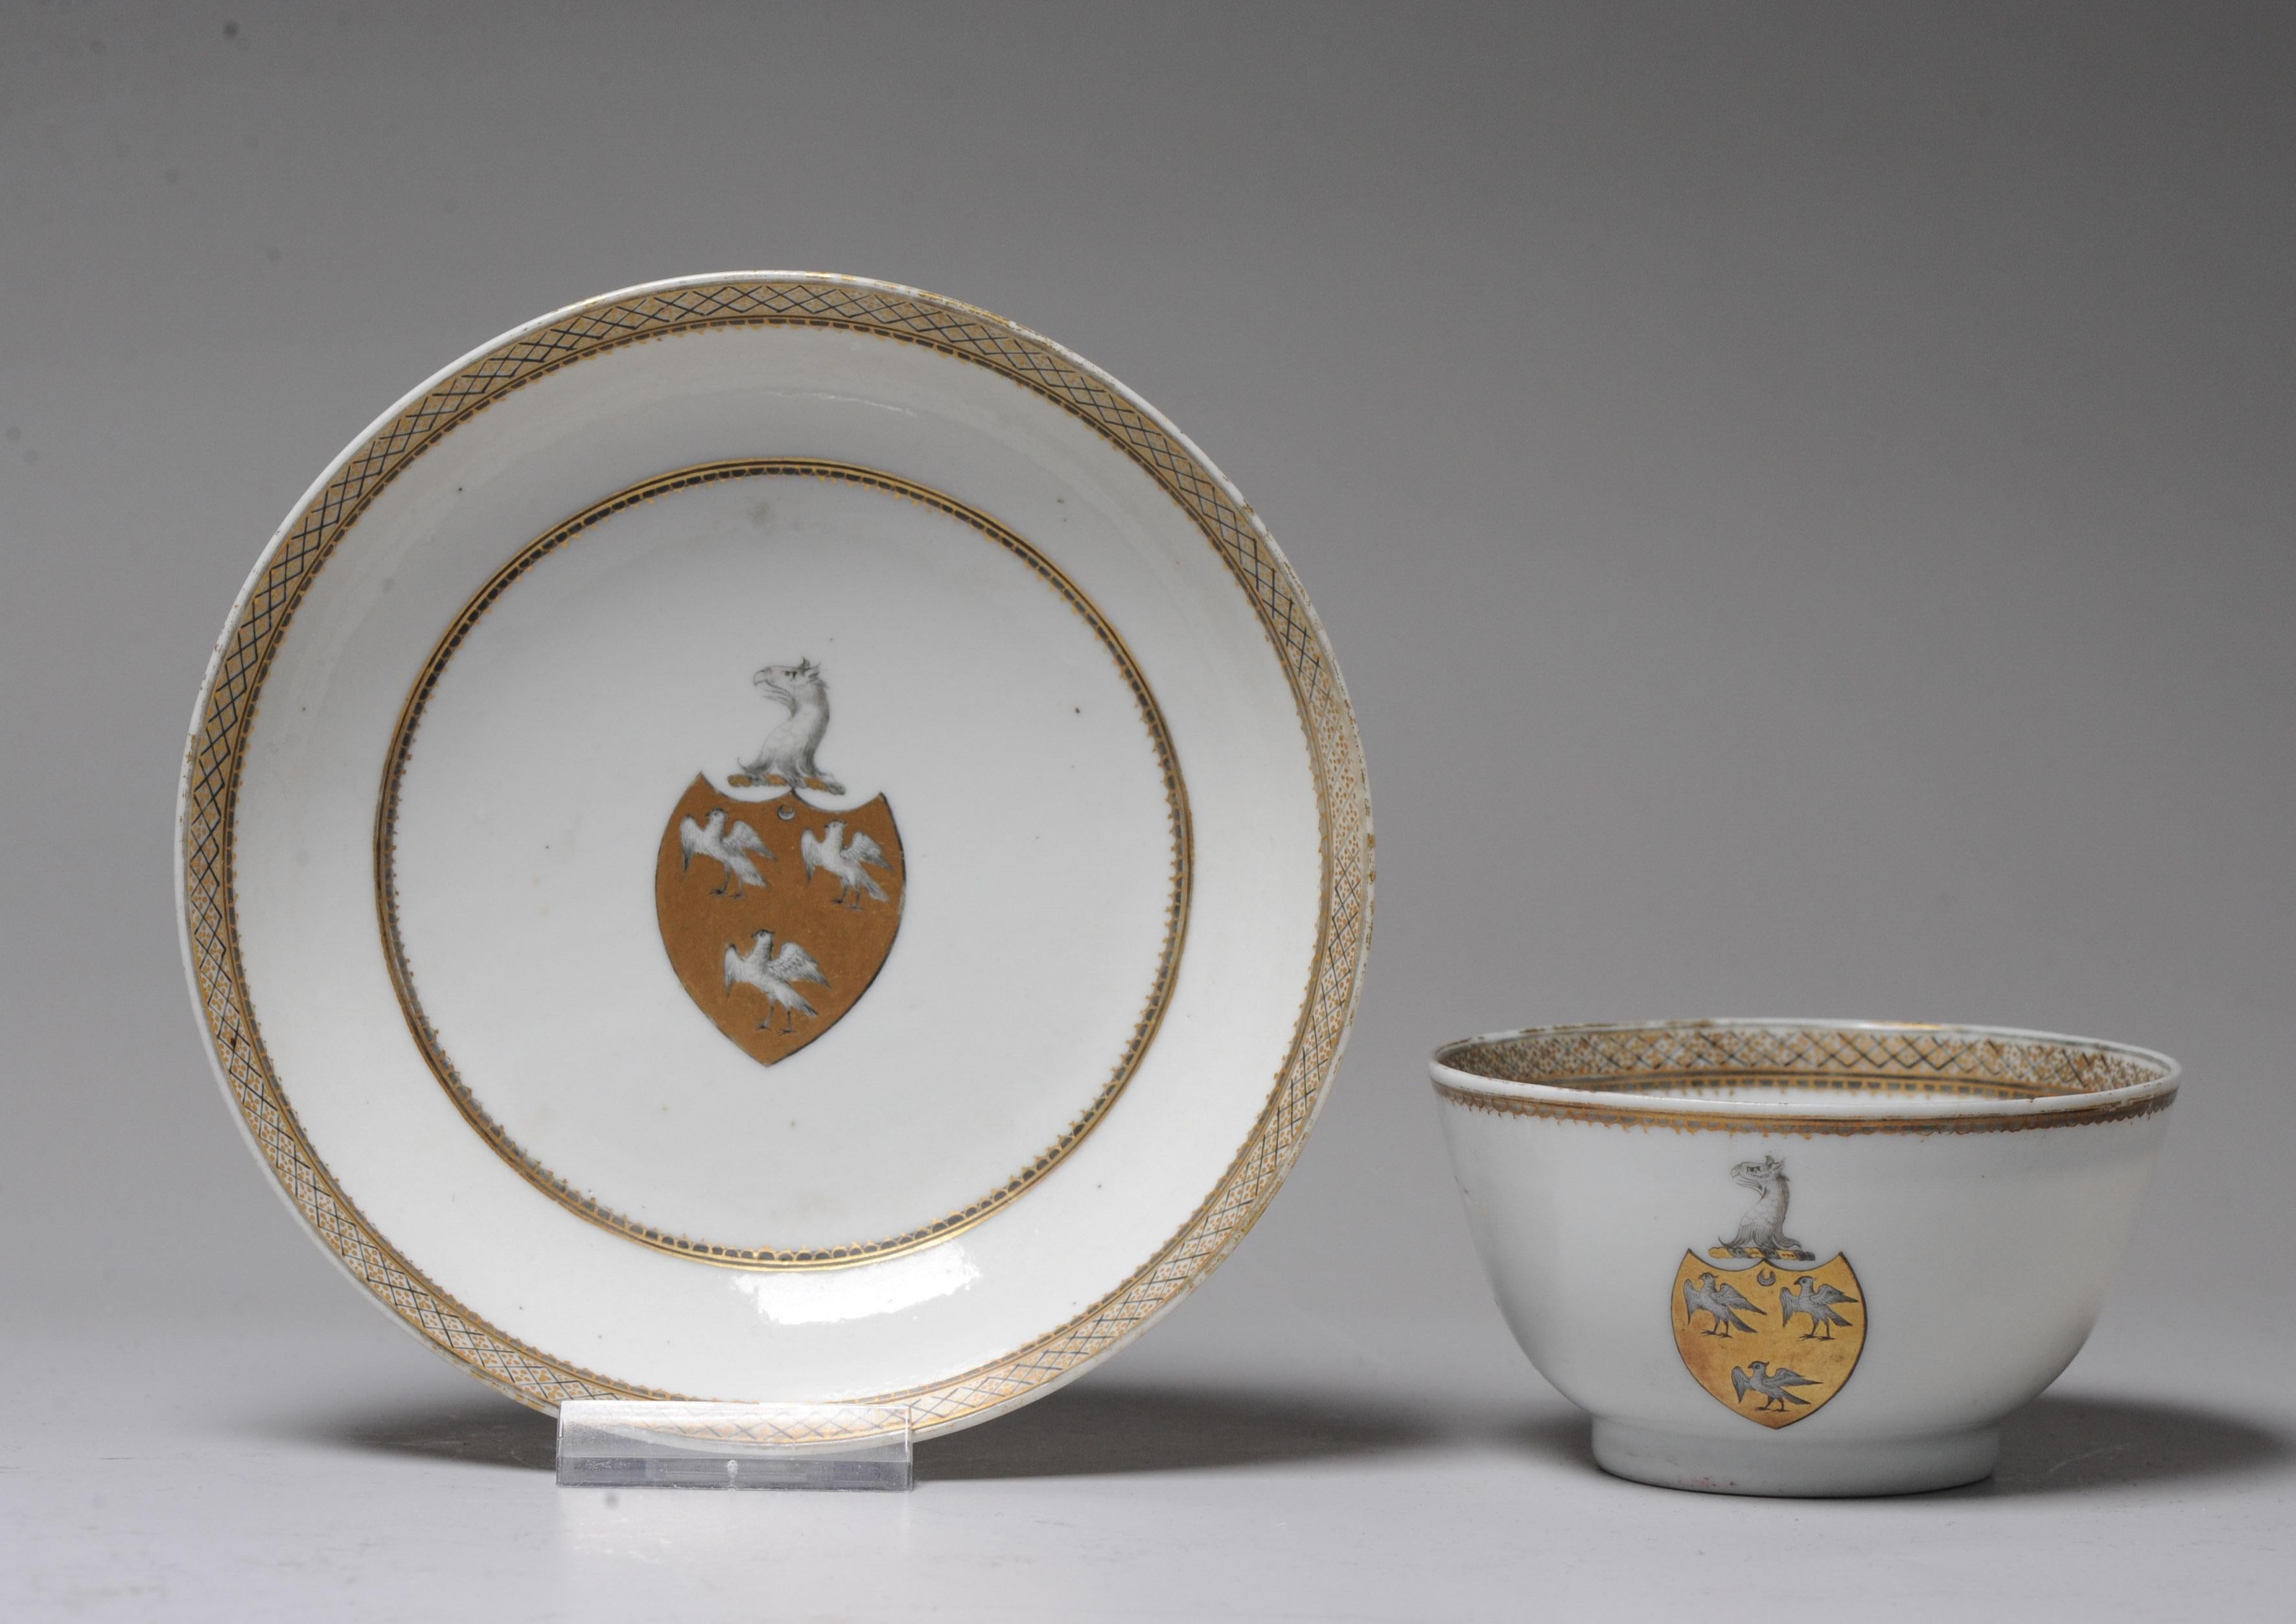 Description

Very nice gold decorated armorial tea bowl.

Reference Howard Armorial Porcelain:

Qianlong c.1790
The arms as painted are, Or three birds rising sable (possibly argent) a crescent for difference; with crest, A griffin's head